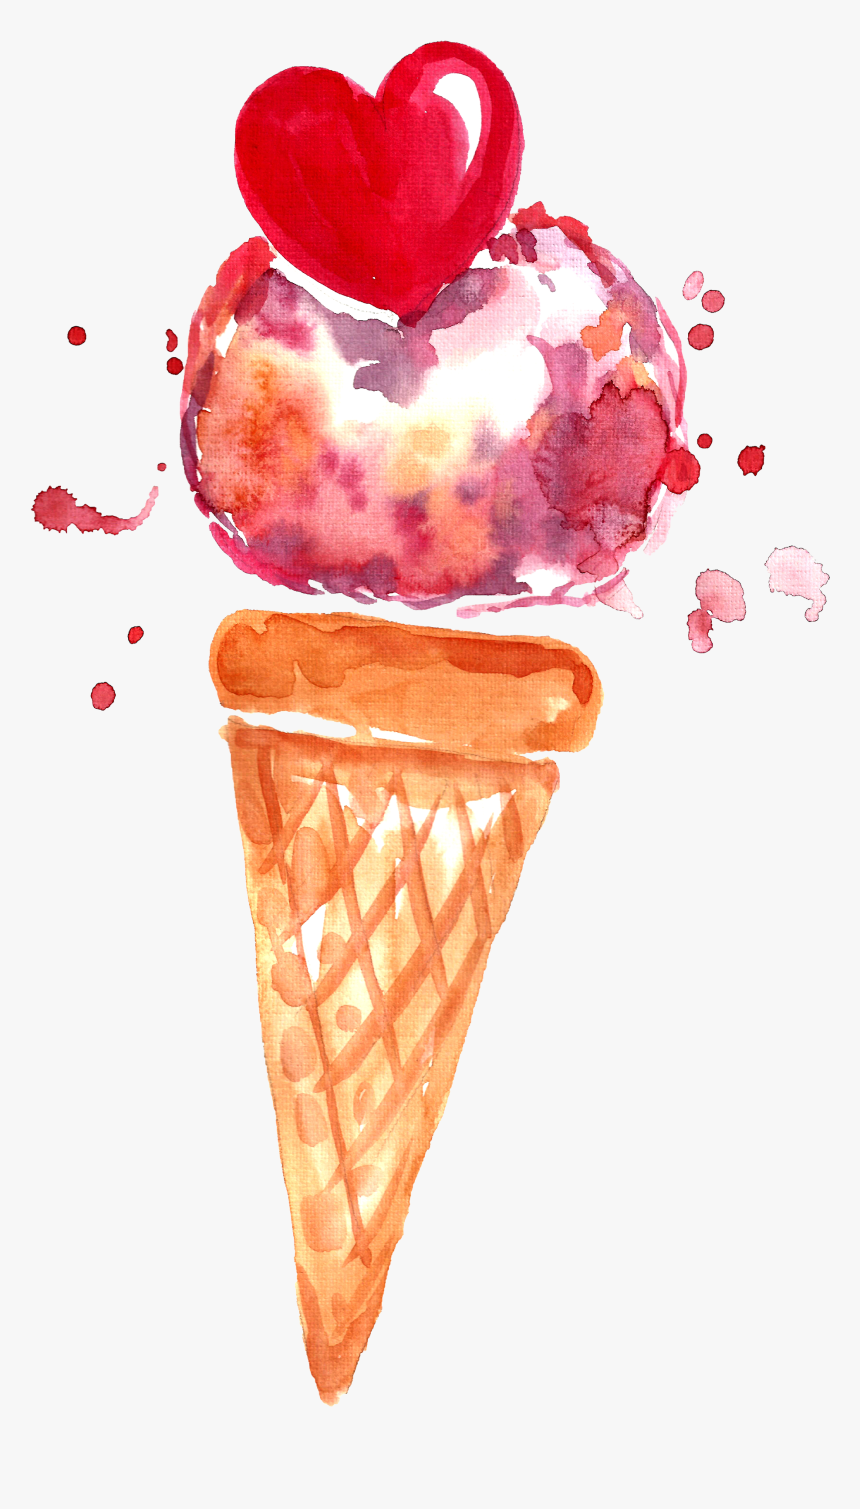 Image Is Not Available - Ice Cream Cone, HD Png Download, Free Download